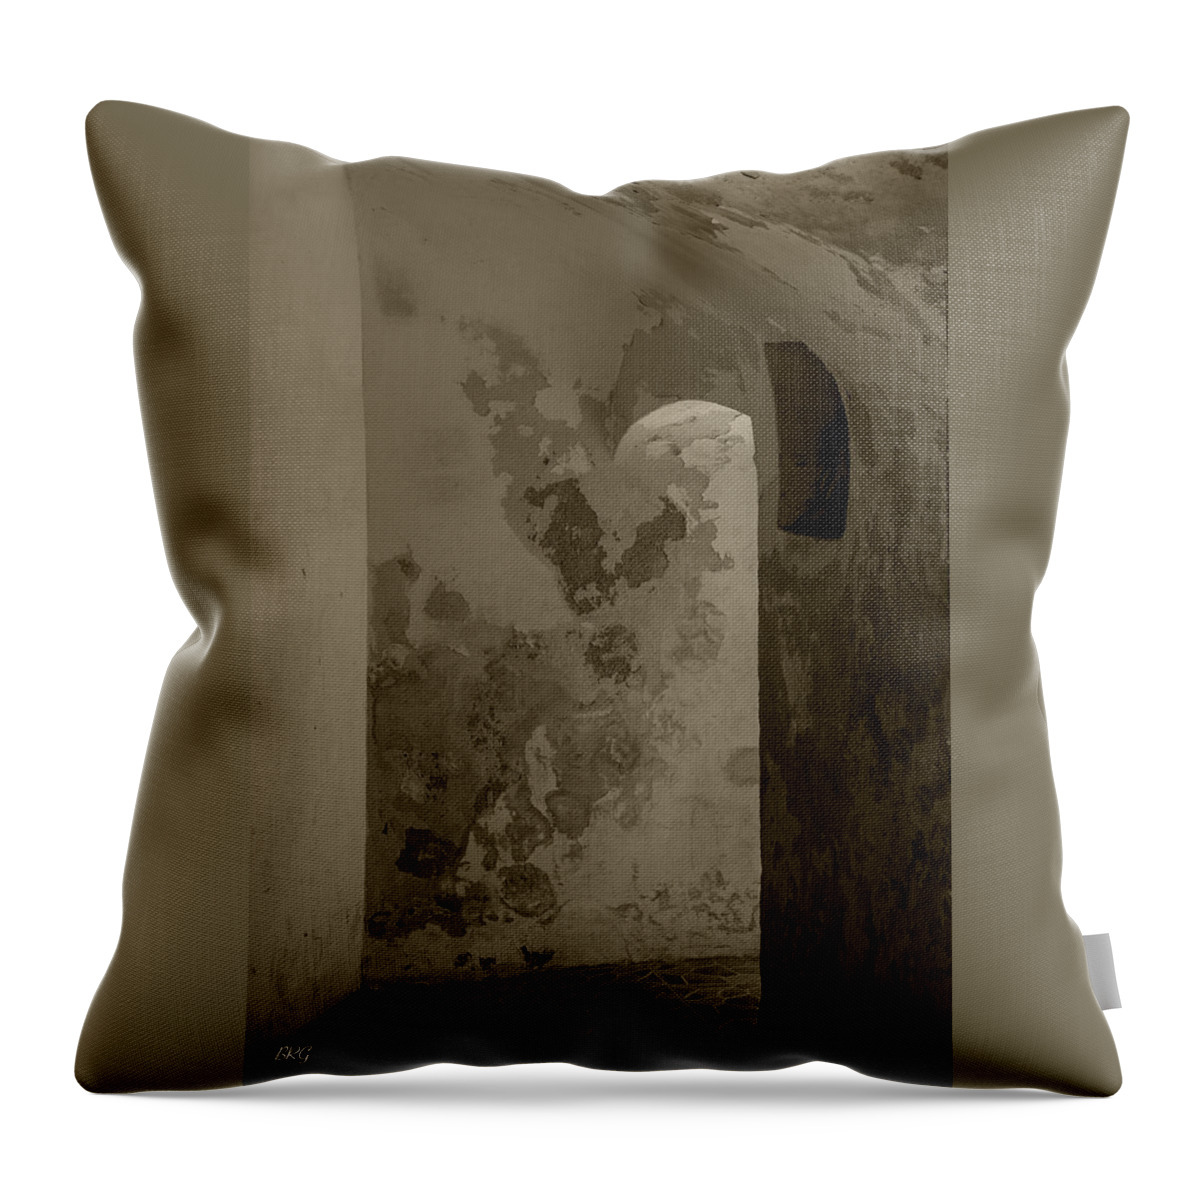 Vintage Throw Pillow featuring the photograph Ancient City Architecture No 2 by Ben and Raisa Gertsberg